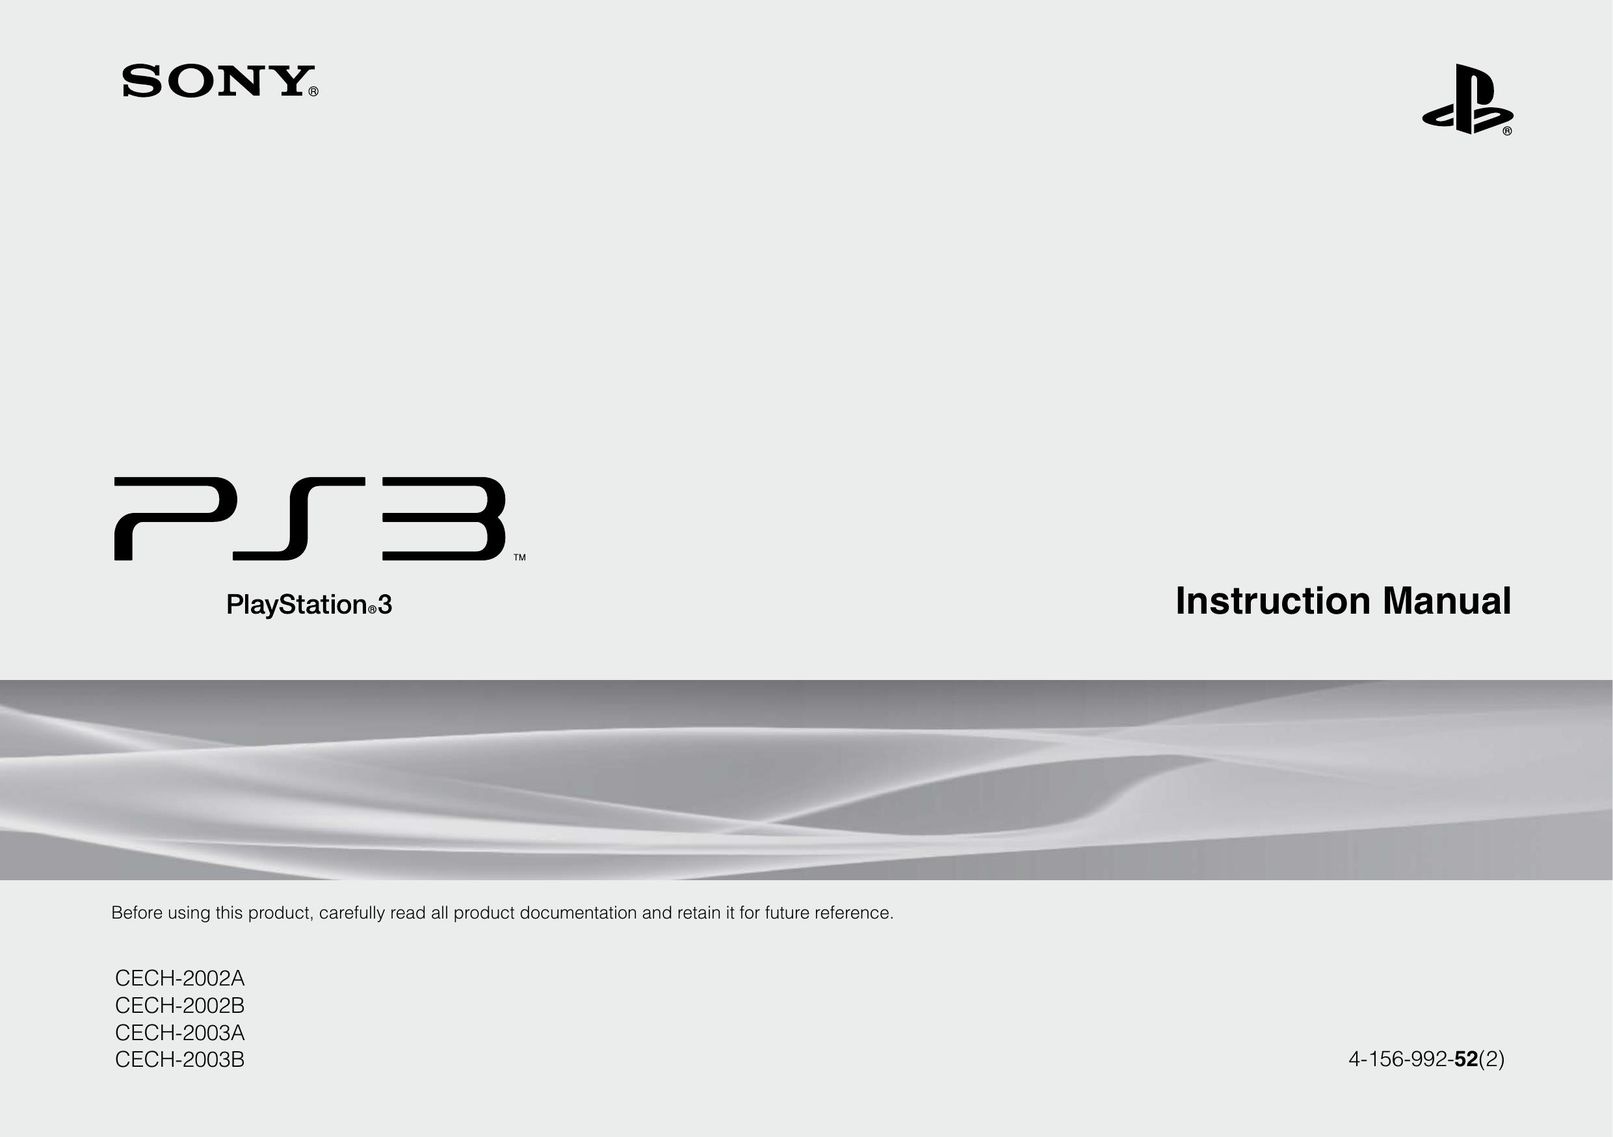 Sony CECH-2003B Video Game Console User Manual